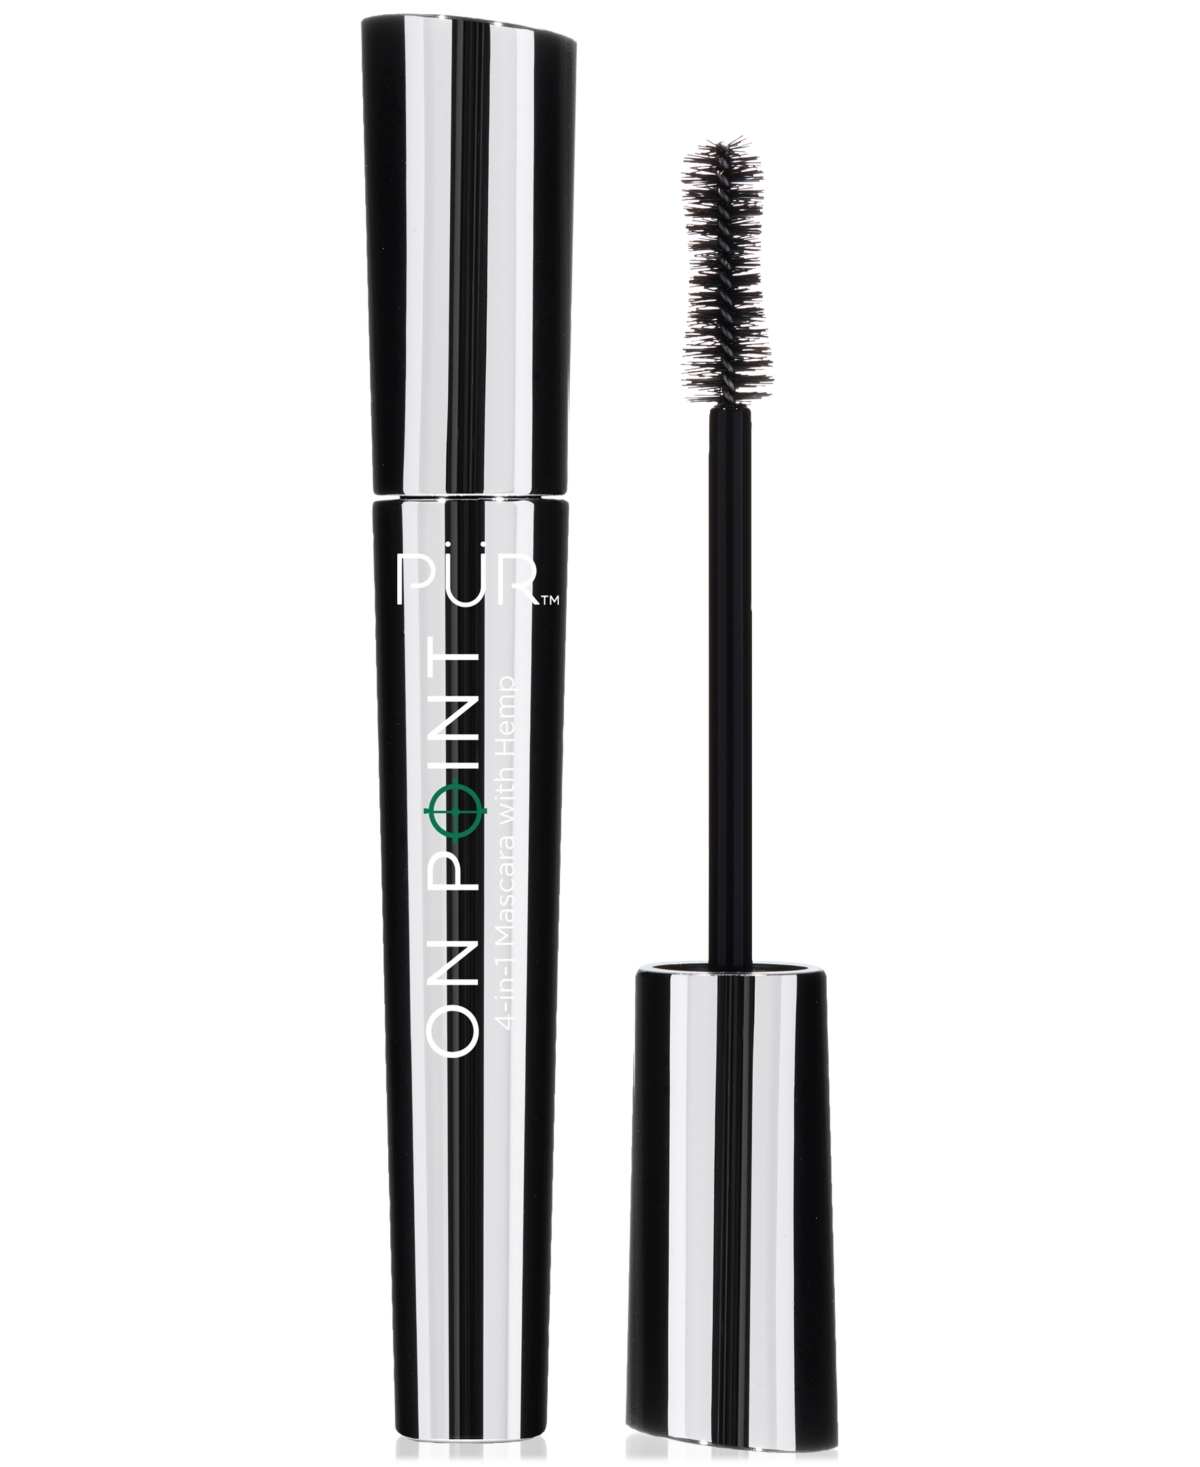 On Point 4-In-1 Mascara With Hemp